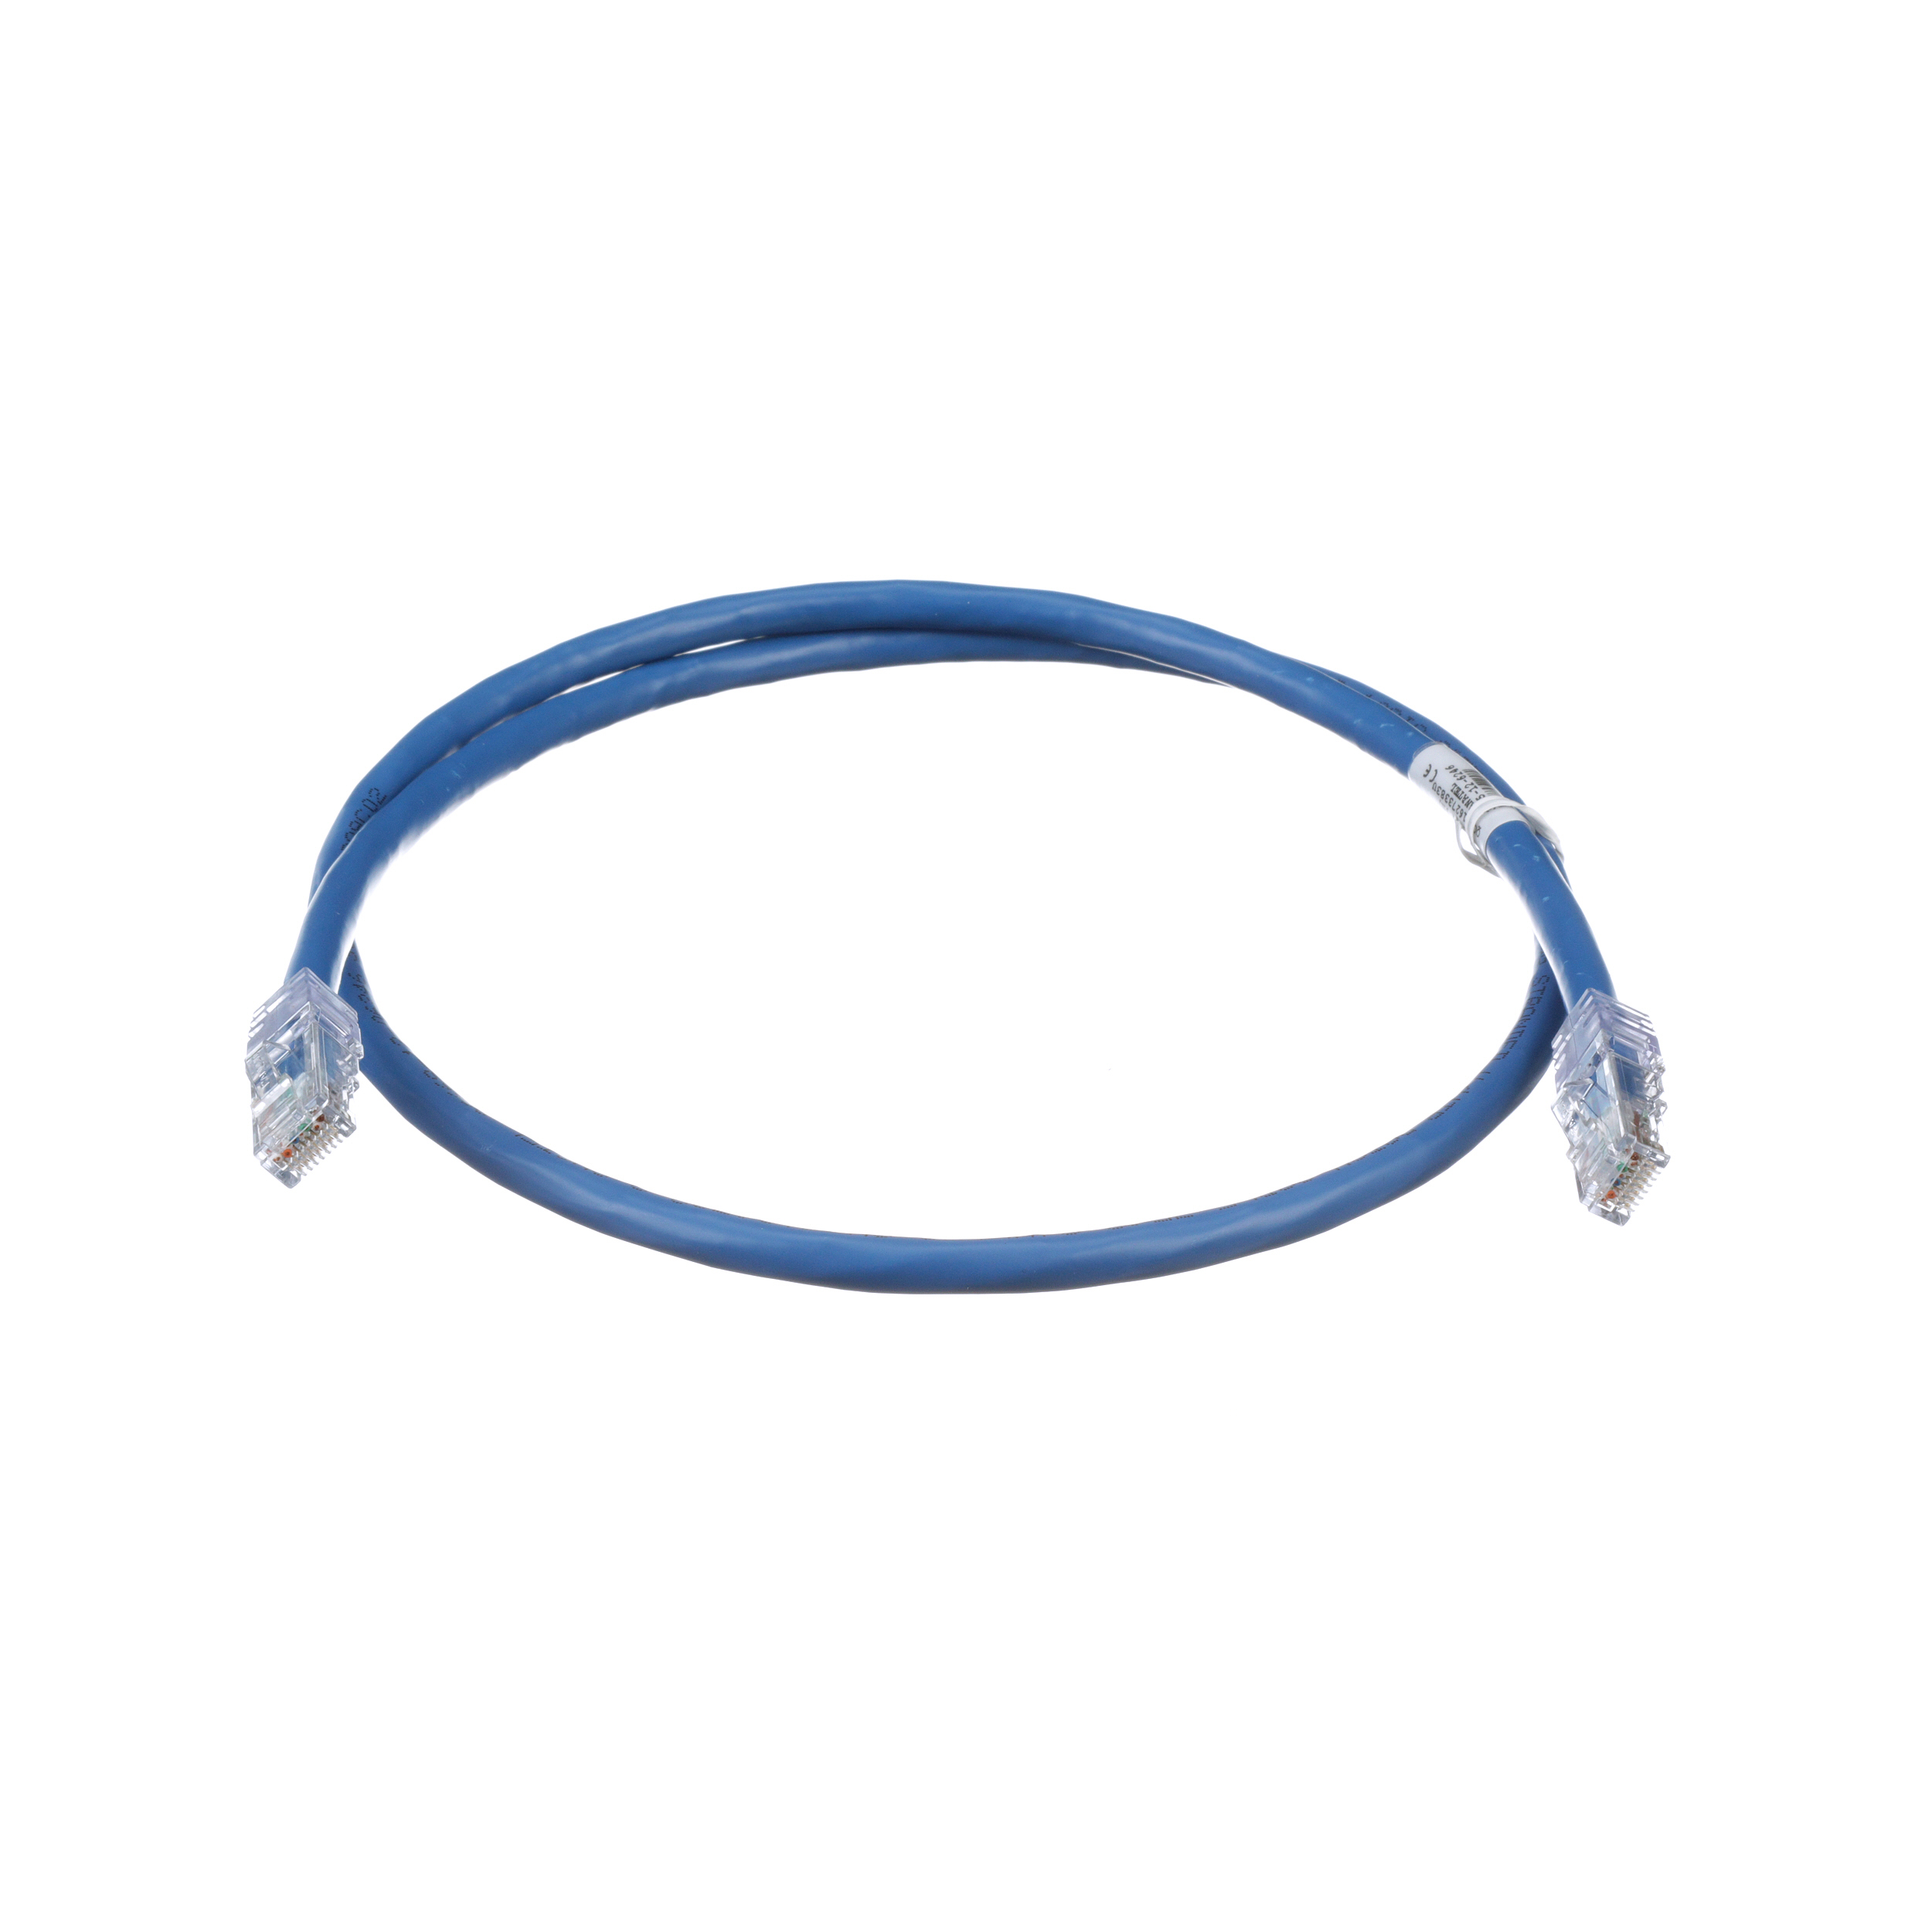 Patch cord, 24 AWG, Cat. 6A, RJ45, 20M, Violet